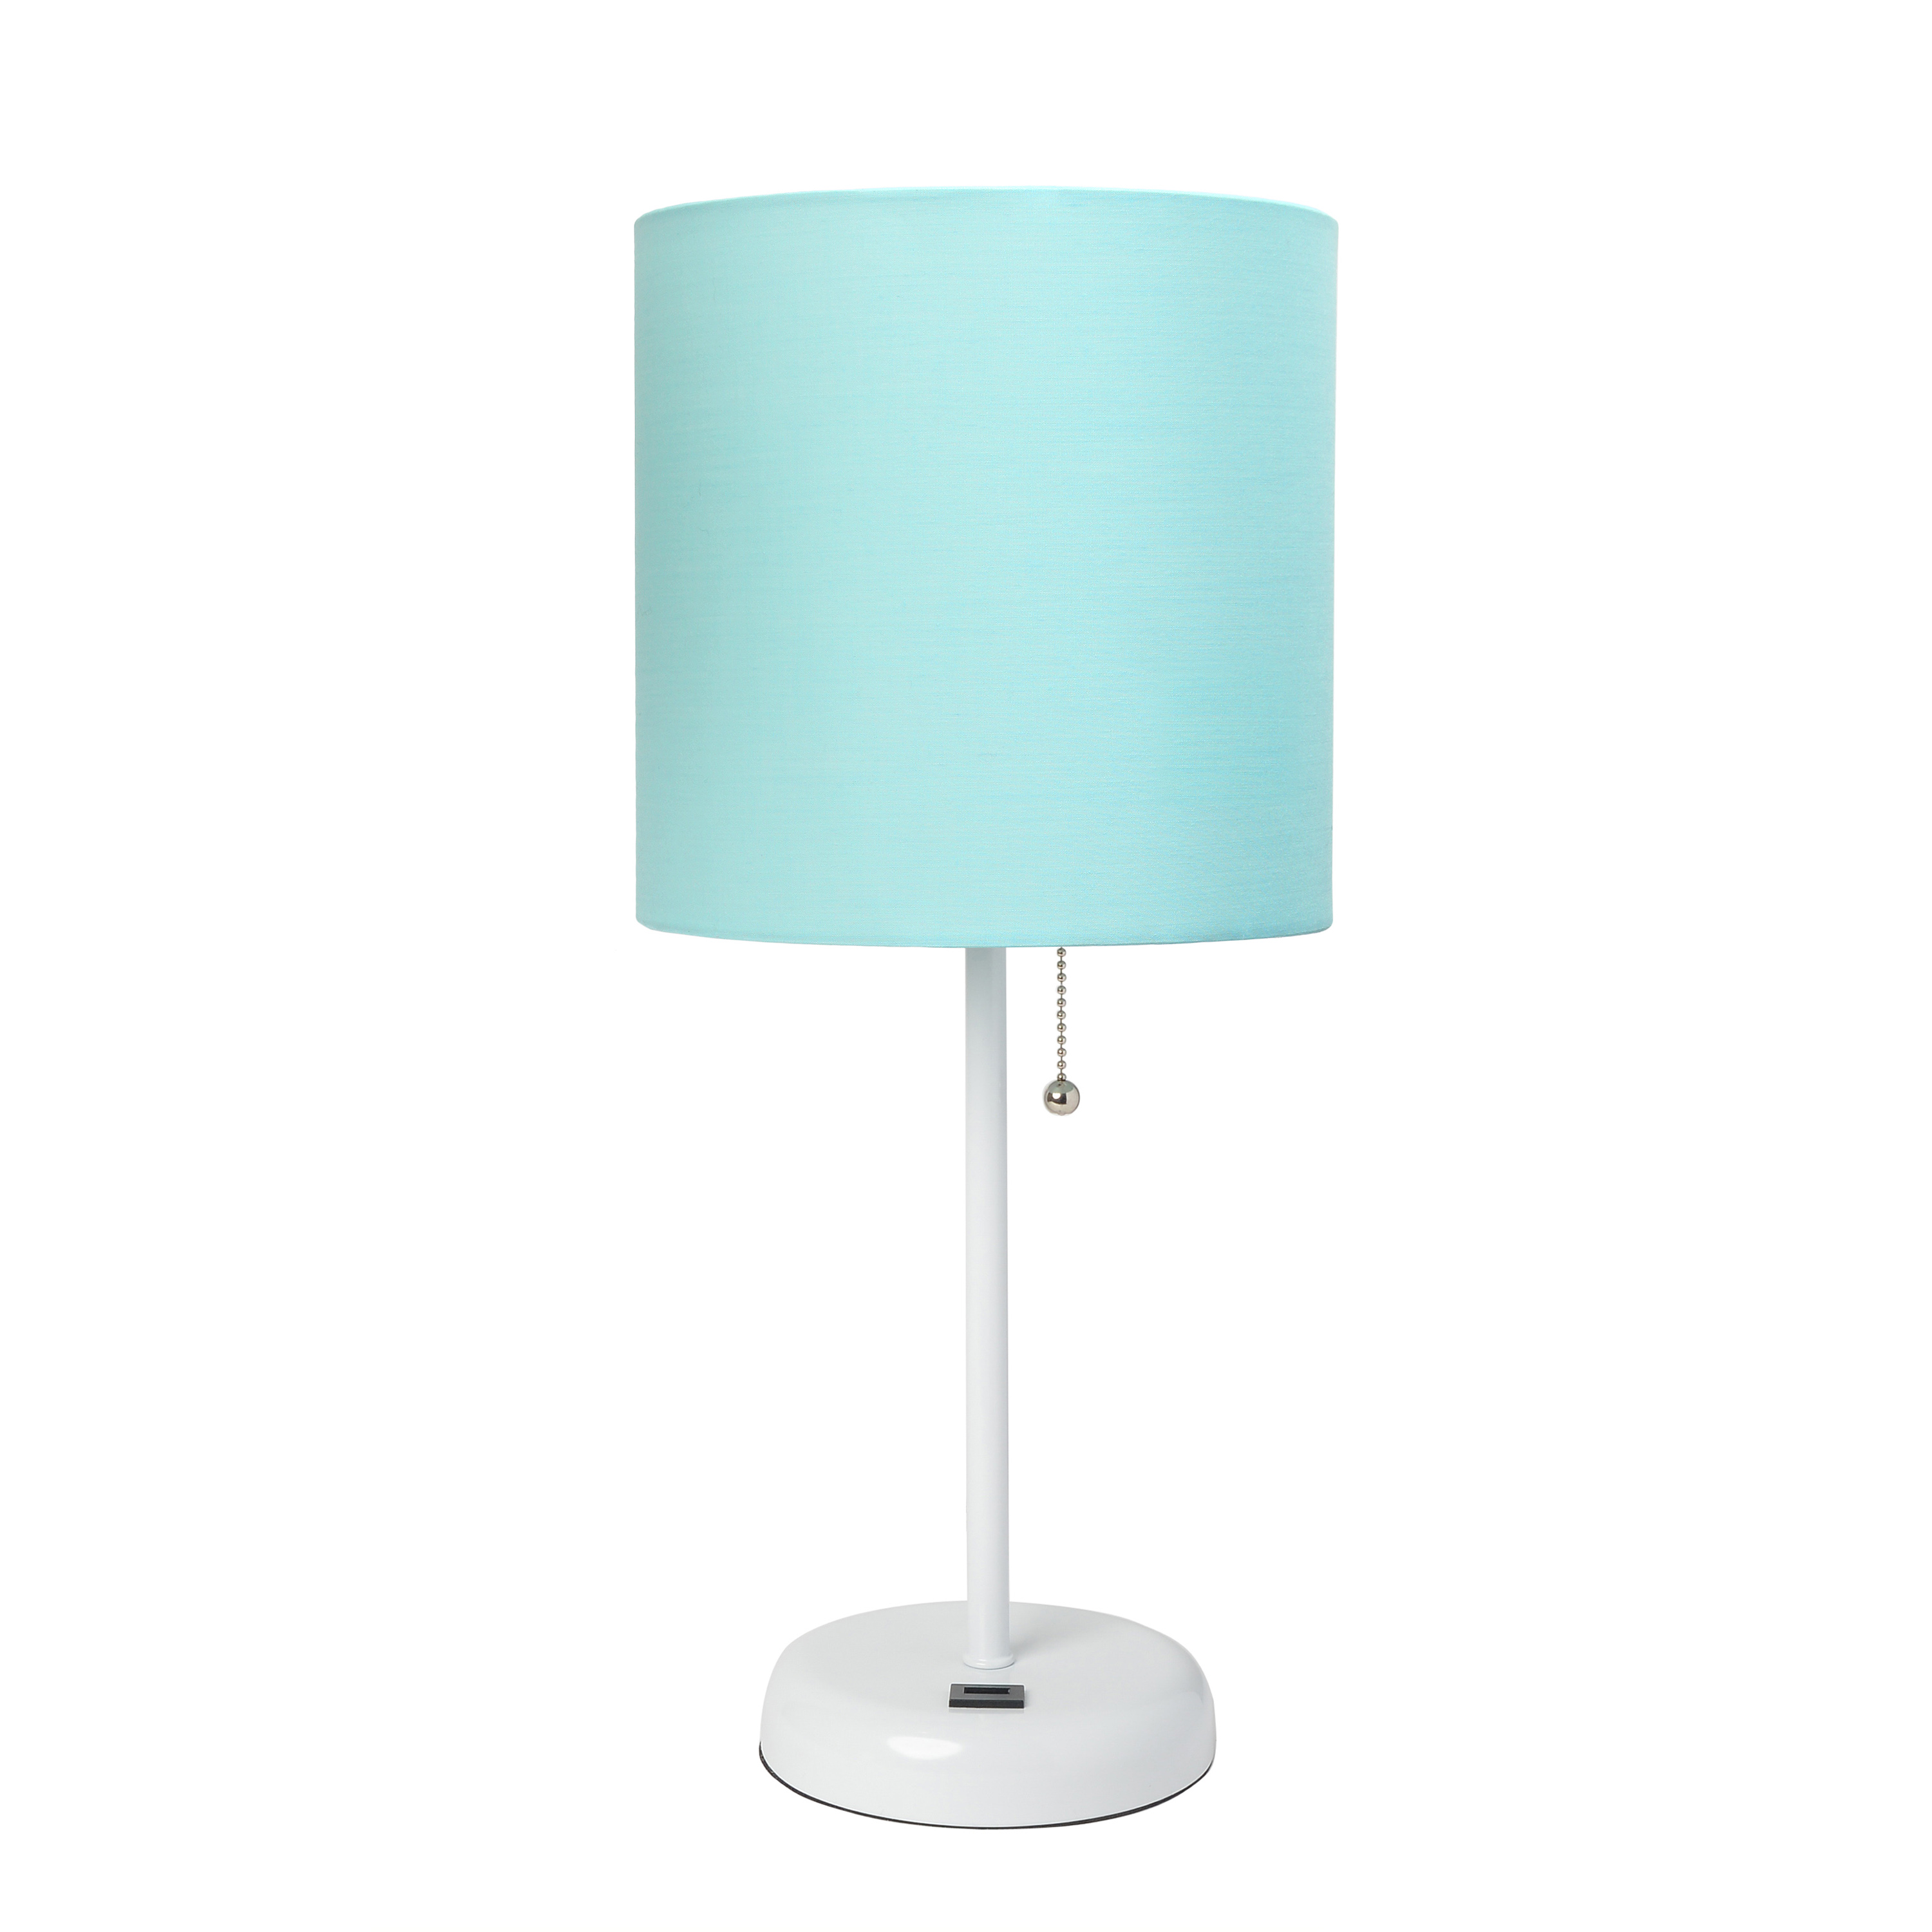 LimeLights White Stick Lamp with USB charging port and Fabric Shade, Aqua 